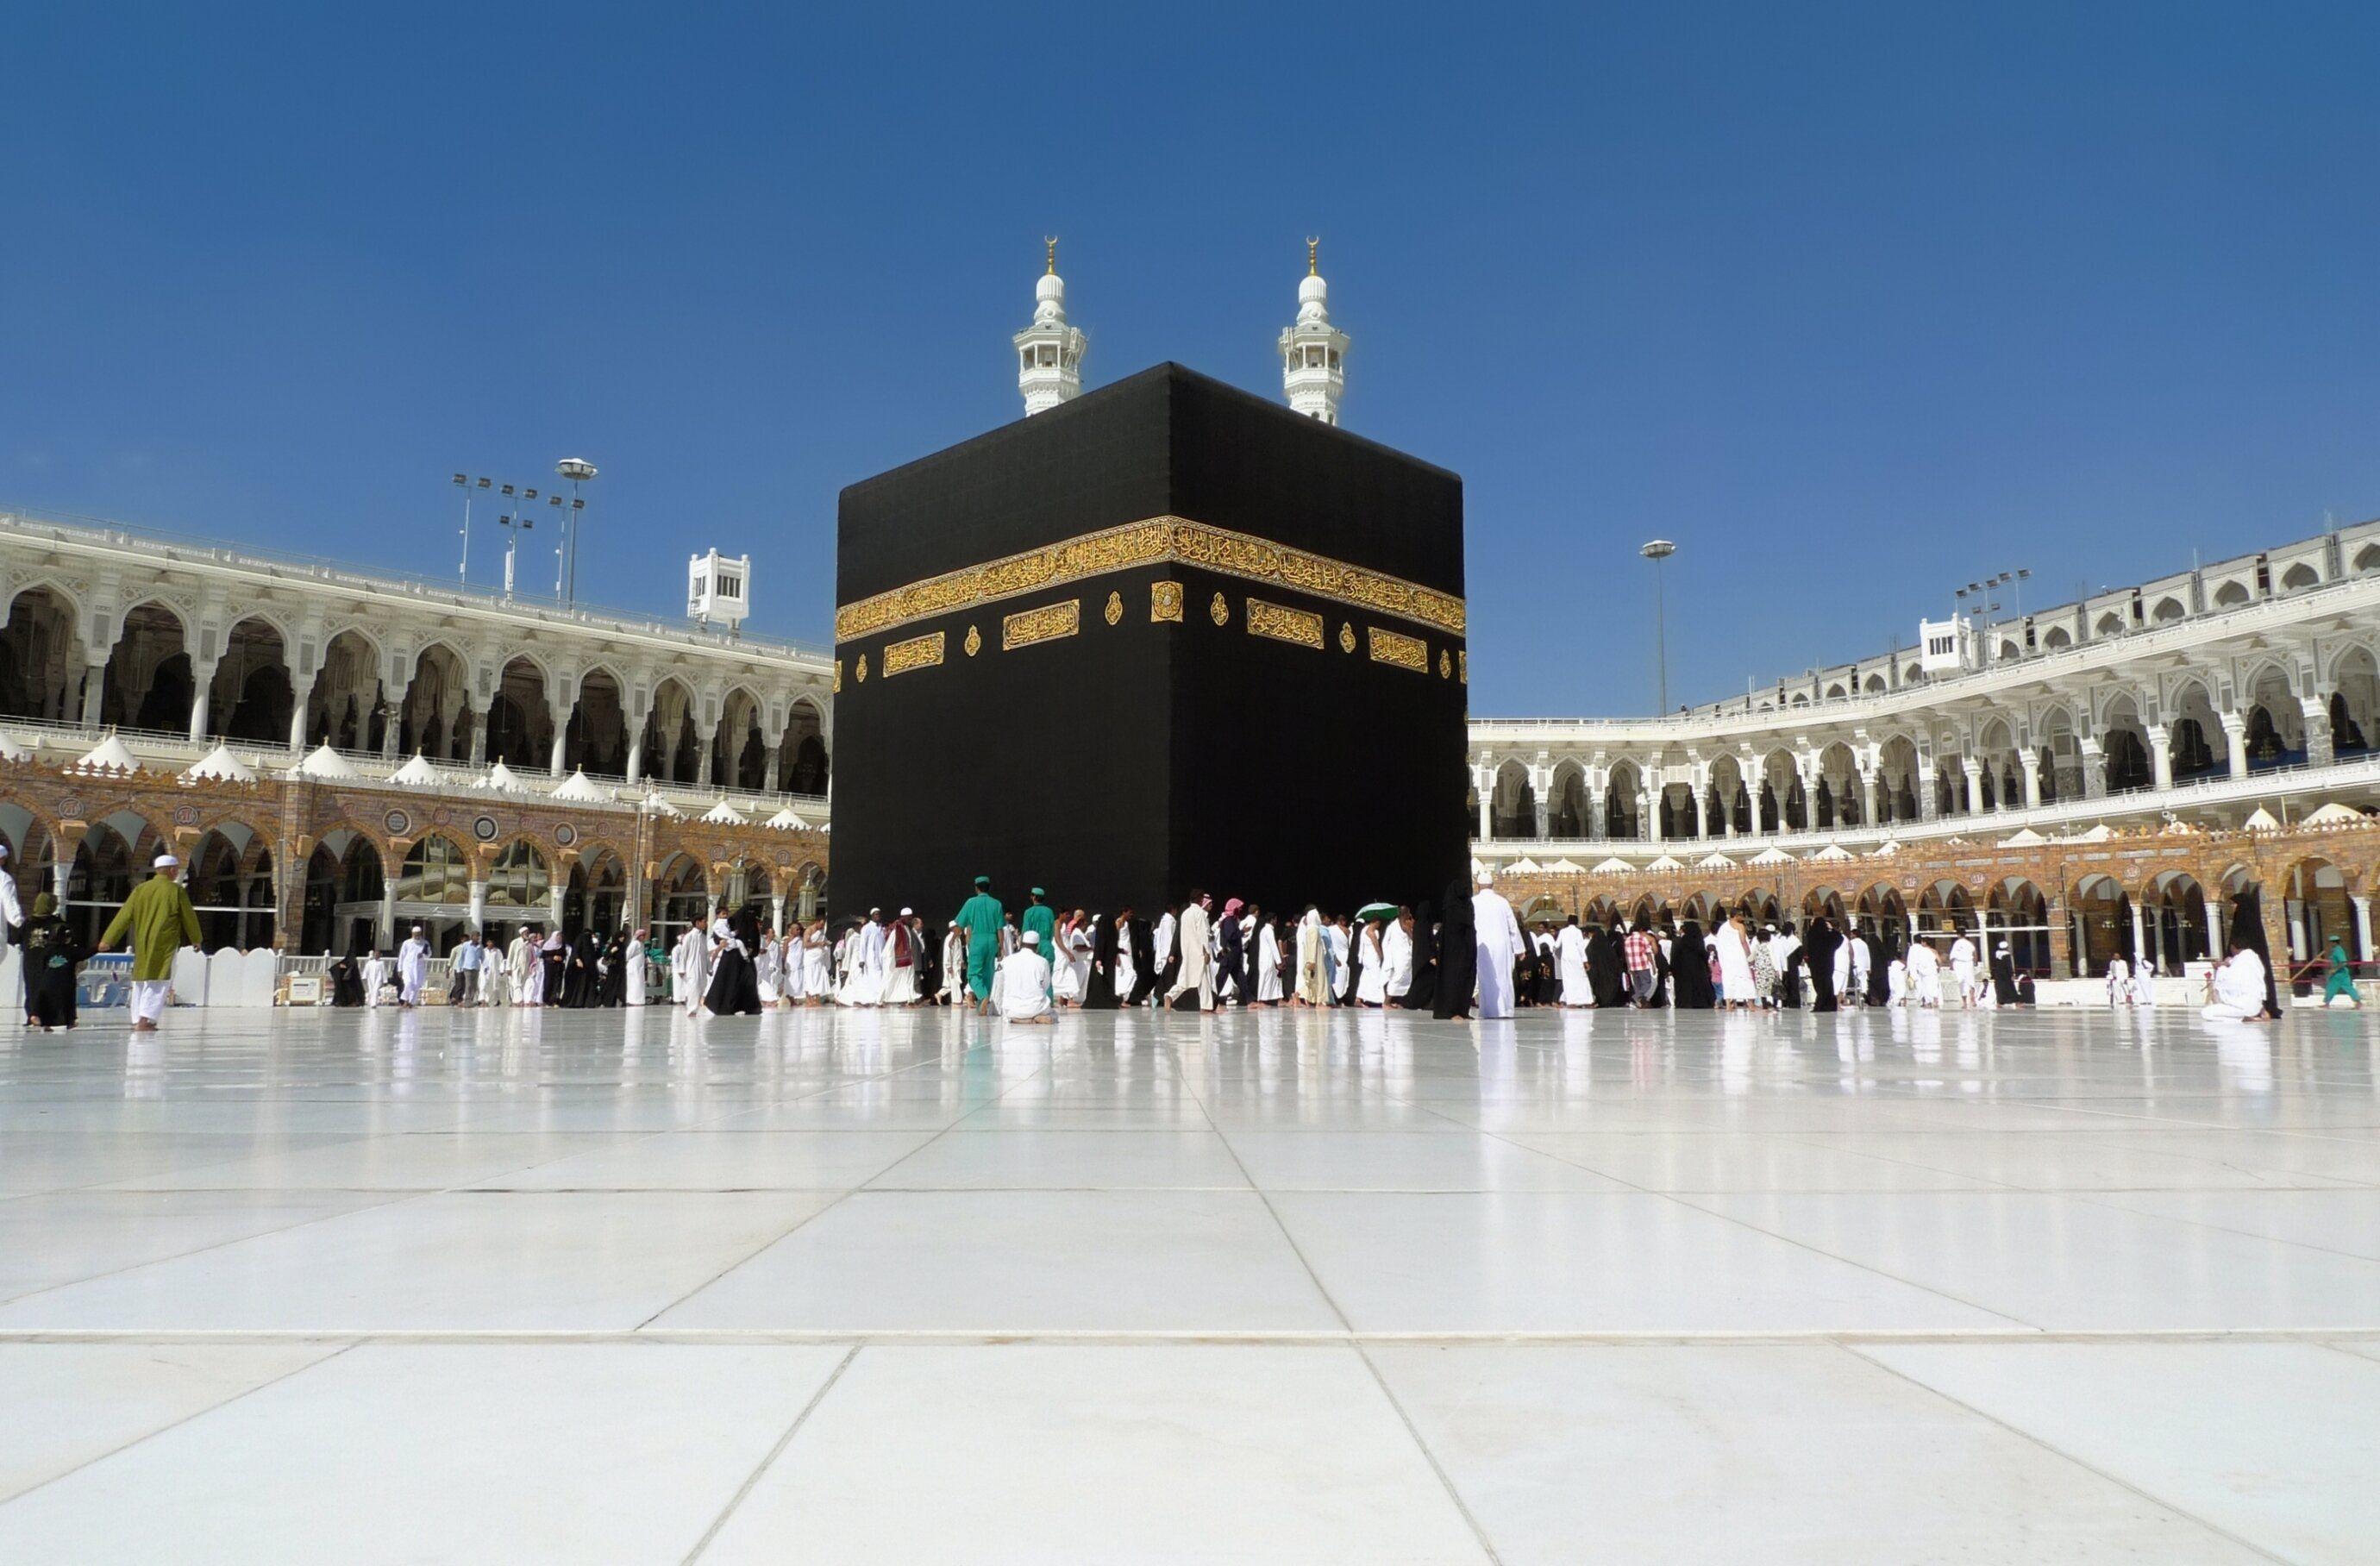 Cost of Umrah pilgrimage services reduced